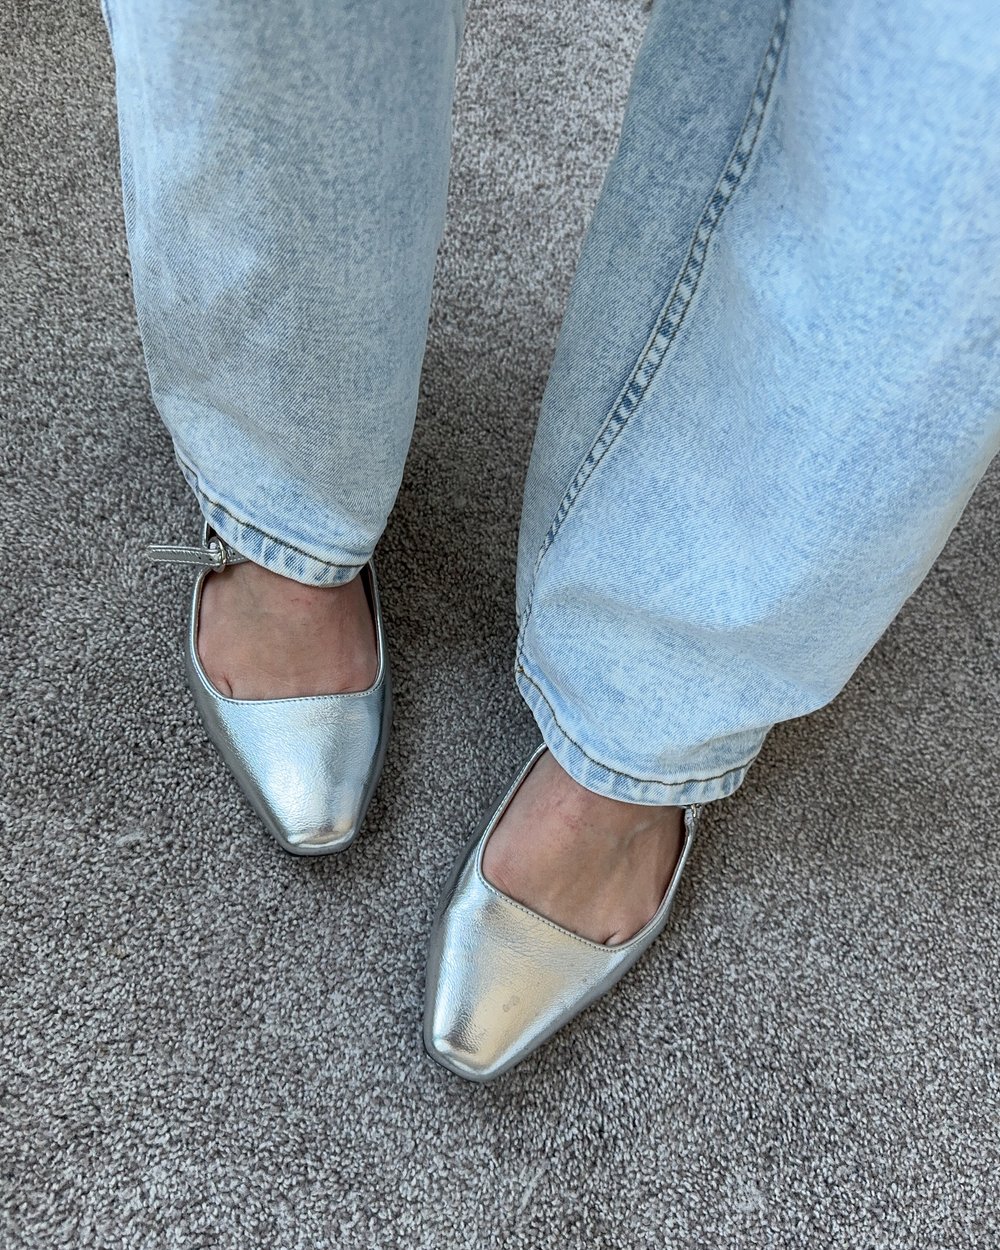 Polished Flats (Loafers are great too)